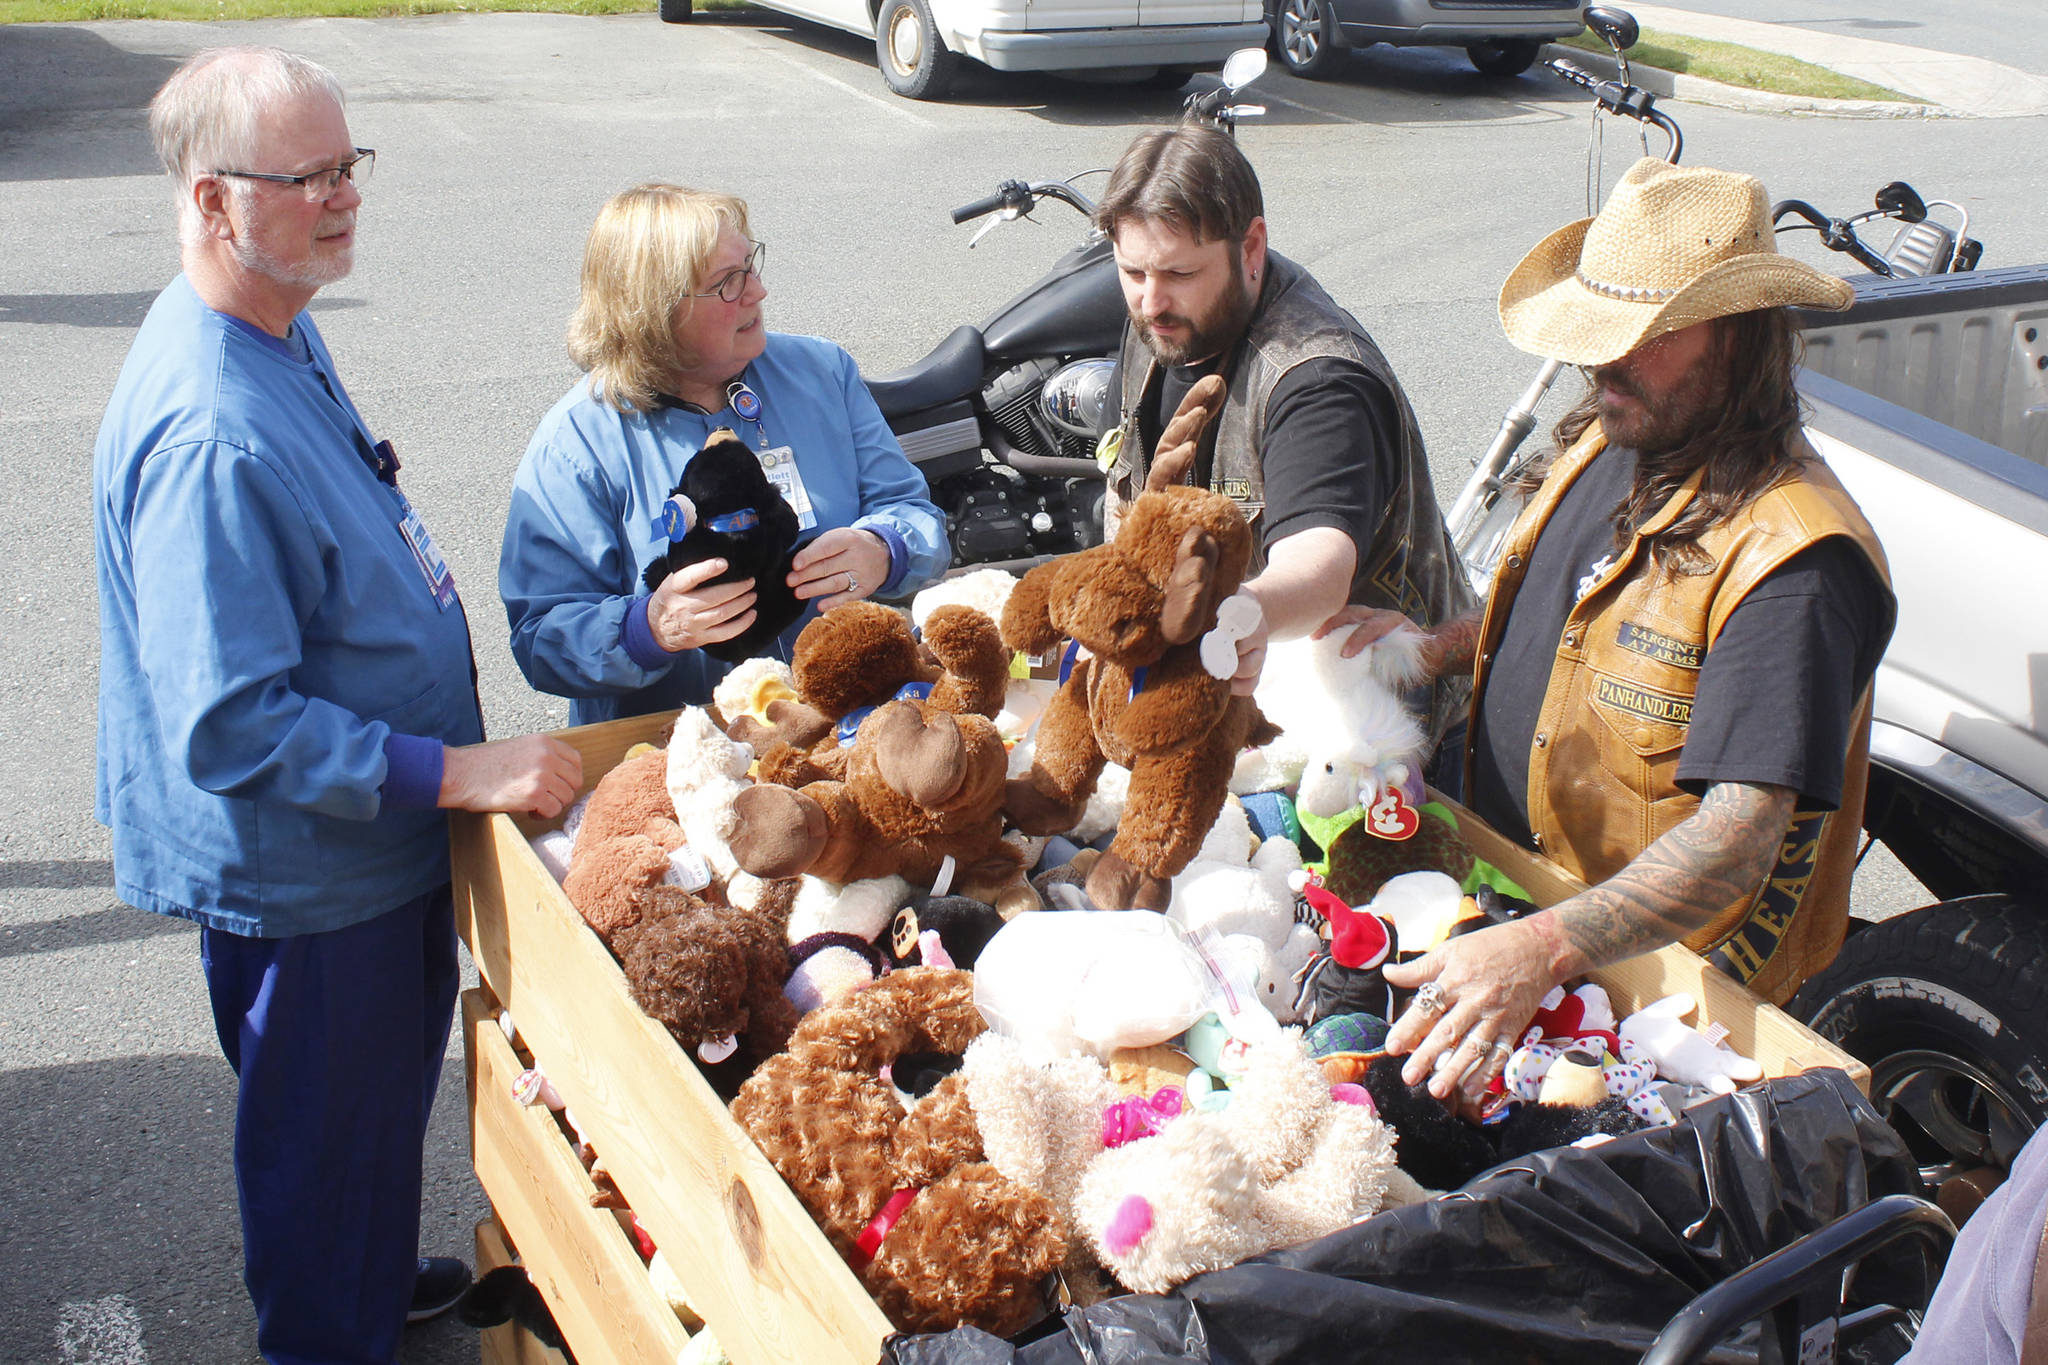 Operating Room Nurse Managers James Jurrens and Sherry O’Connor admire the haul of toys as Southeast Alaska Panhandlers Motorcycle Club Secretary Justin Papenbrock (third from left) and Sargent-at-Arms Steve “Shiner” Buckhouse (far right) put toys in a crate at Bartlett Regional Hospital on Friday, Aug. 17, 2018. The club donated about 500 toys to the hospital as part of its 24th annual Toy Run. (Alex McCarthy | Juneau Empire)